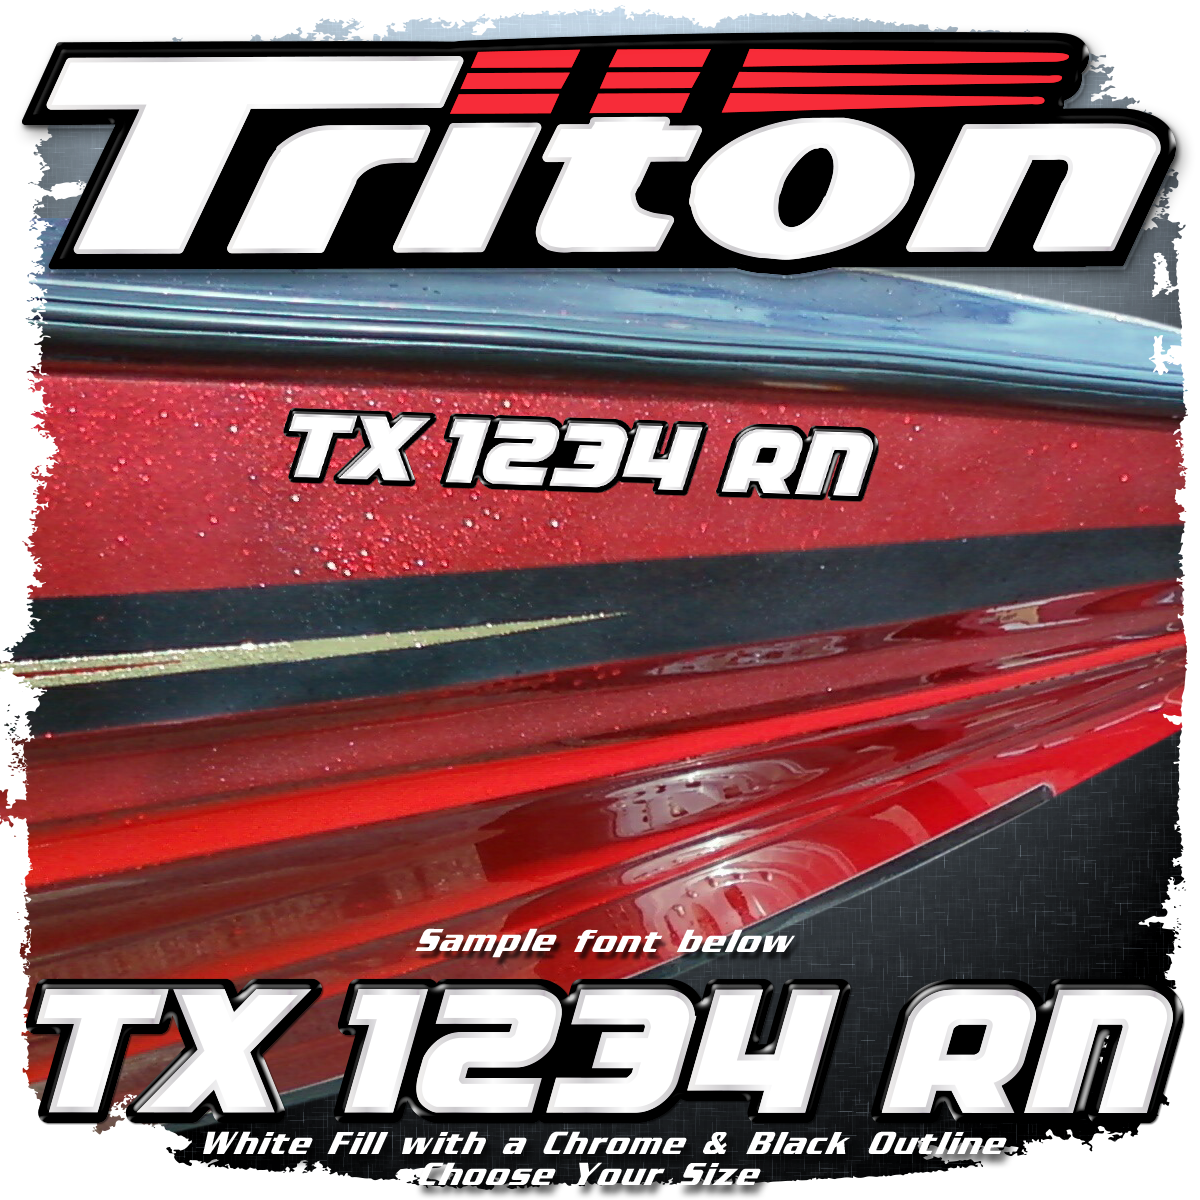 Triton Boats Factory Matched White, Chrome & Black Registration (2 included)